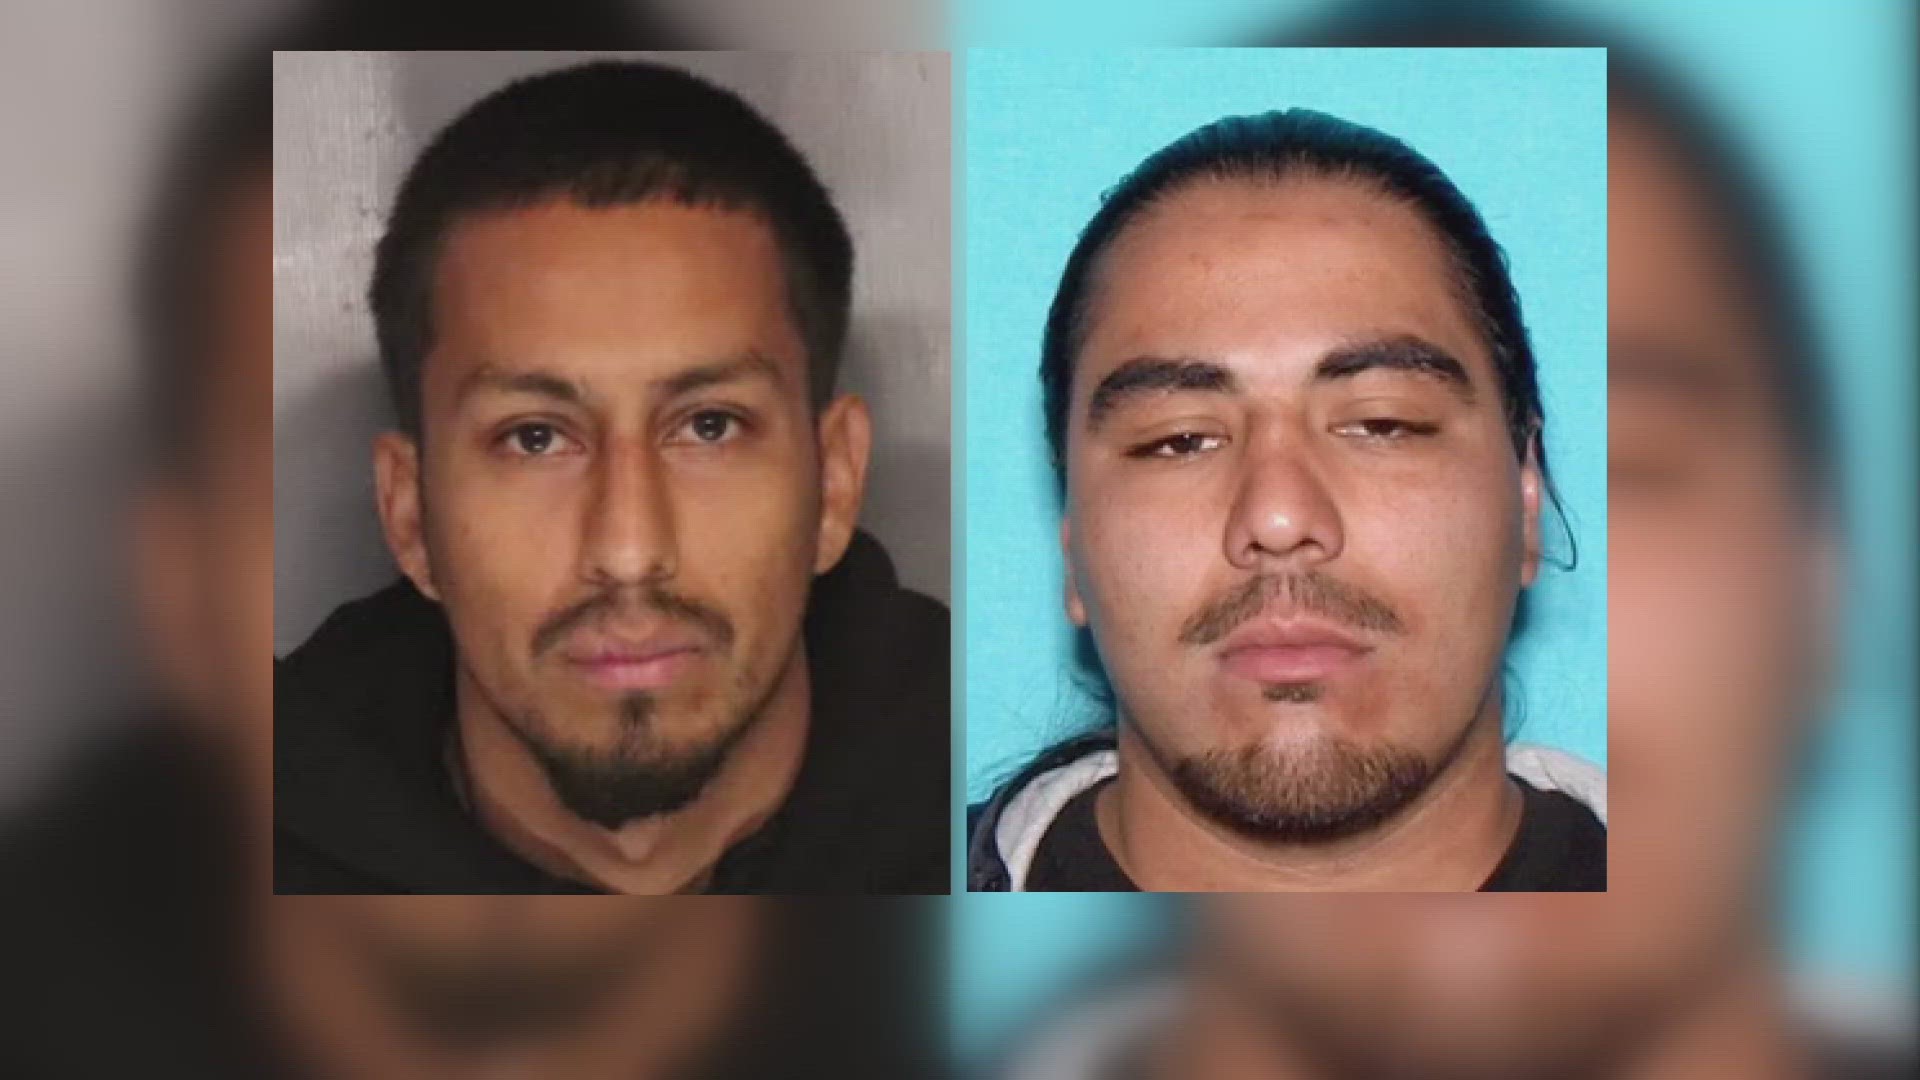 Both accused kidnappers are Bay Area residents.